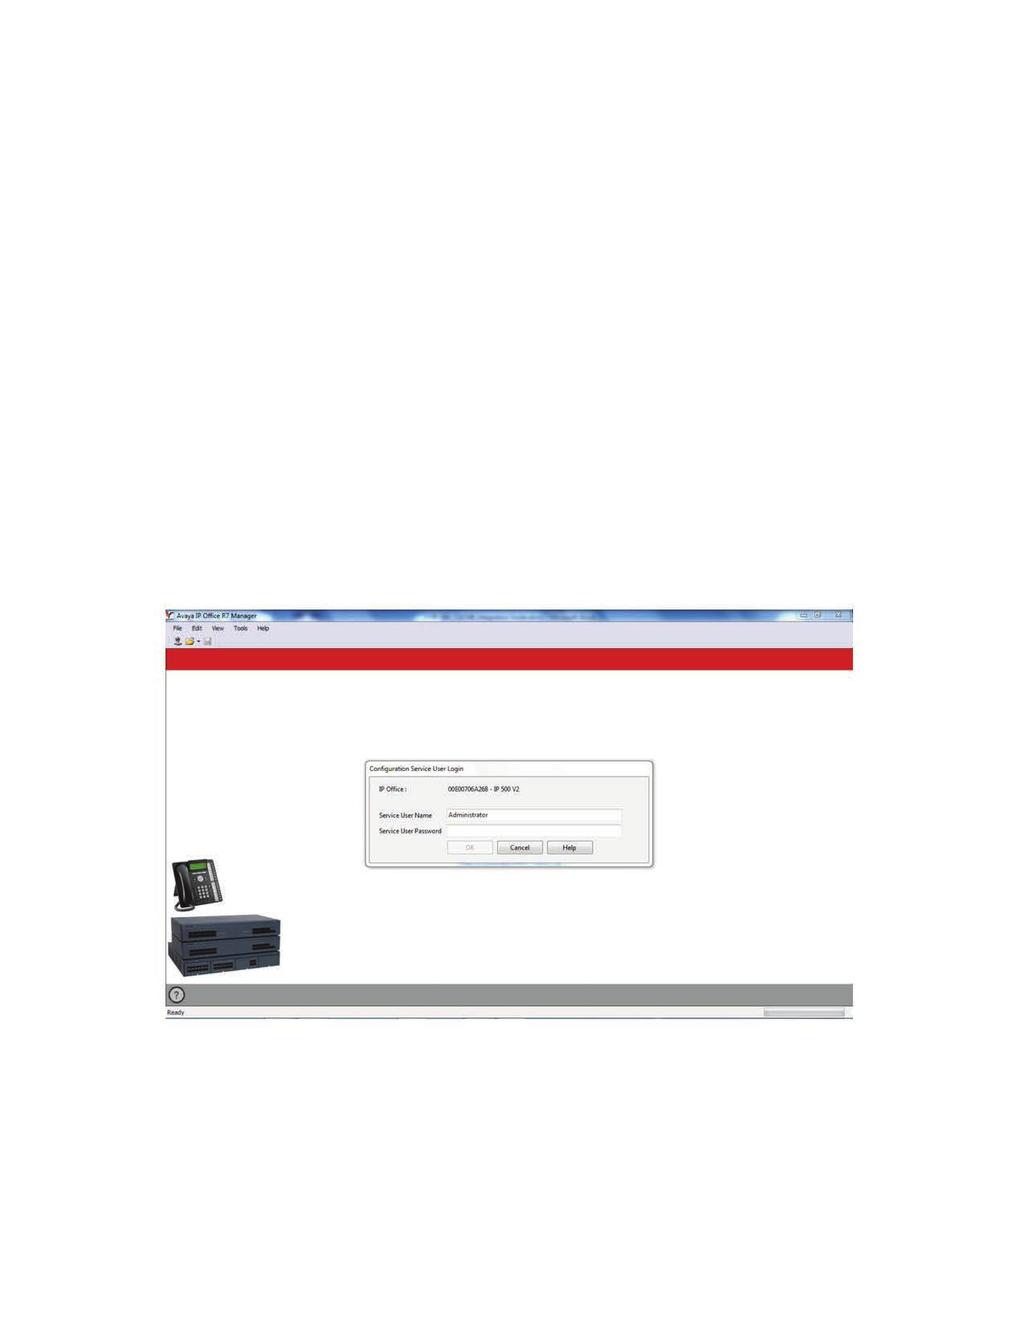 12 Avaya IP Office Integration Guide Introduction IP1500 and IP2500 Series This Avaya IP Office Integration Guide provides general instructions for integration of the IP1500/2500/5000 Series Phones